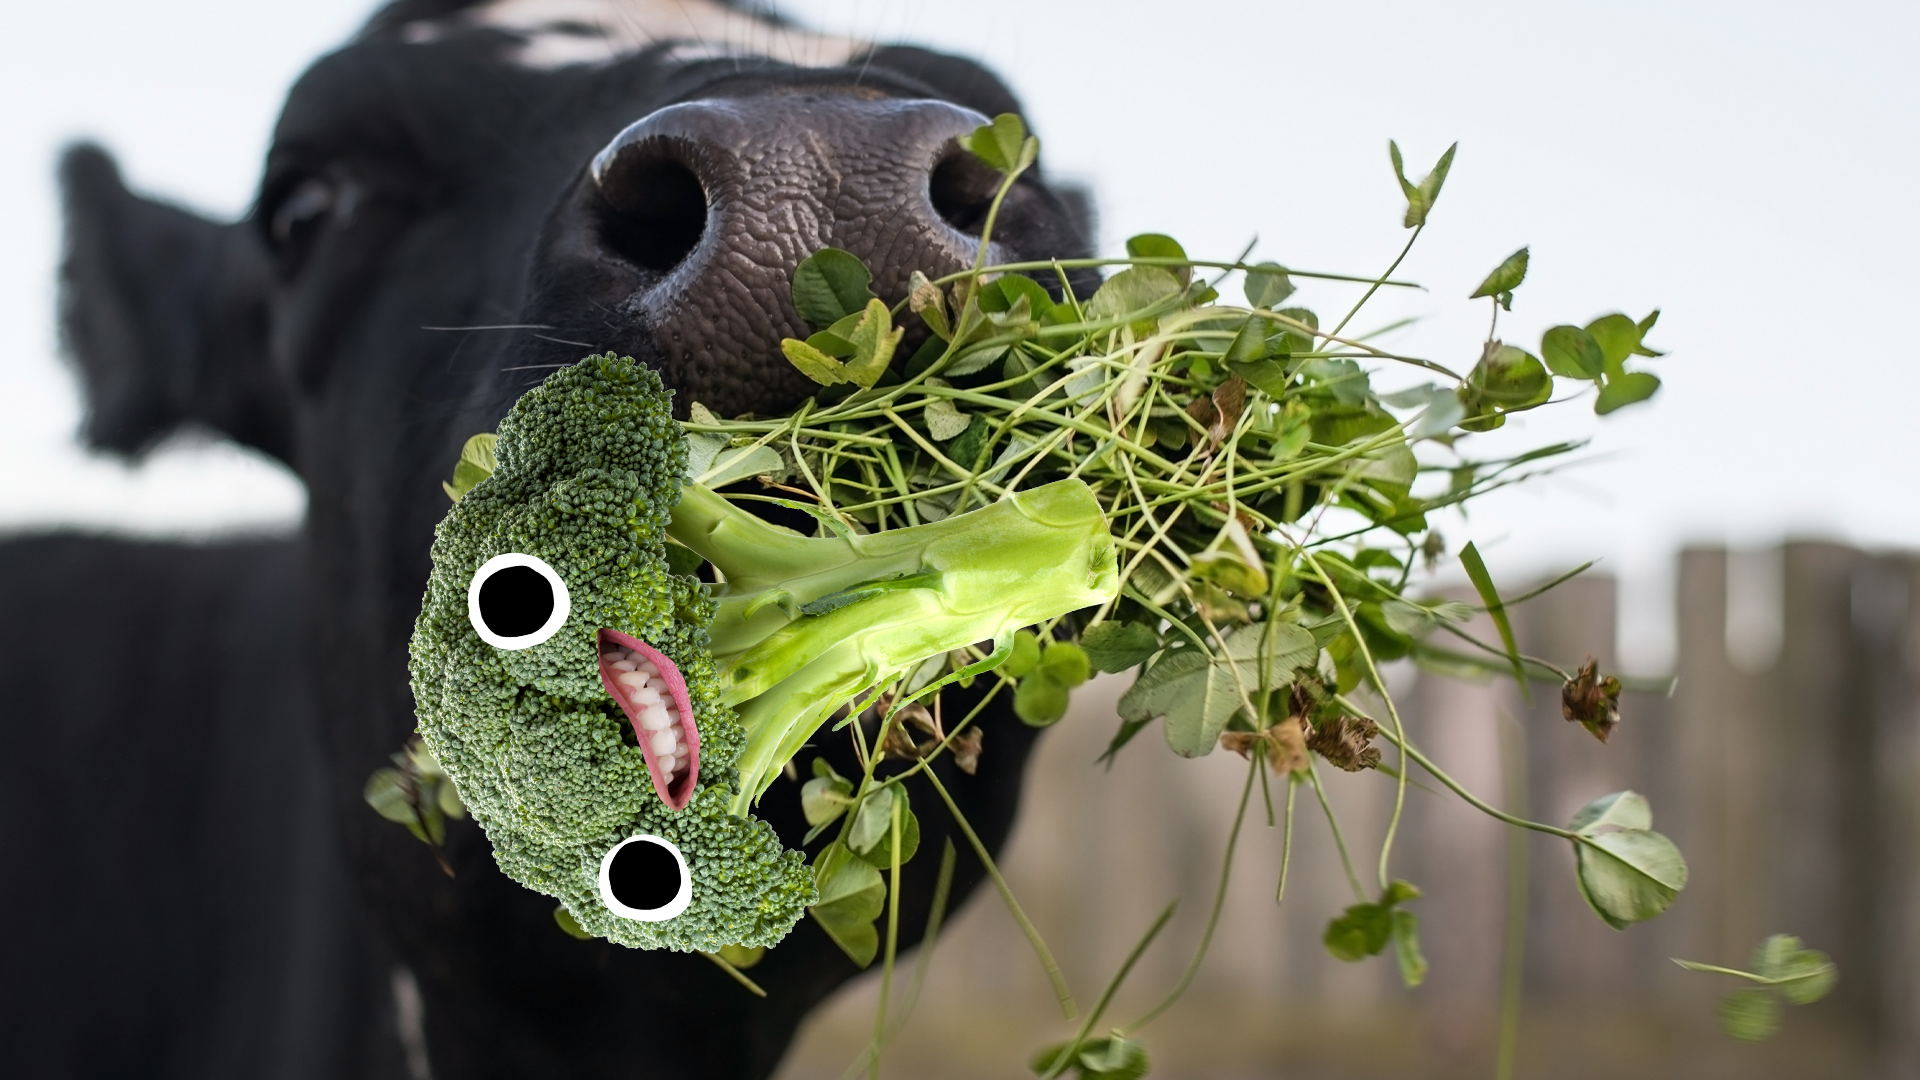 Beano broccoli being eaten by cow